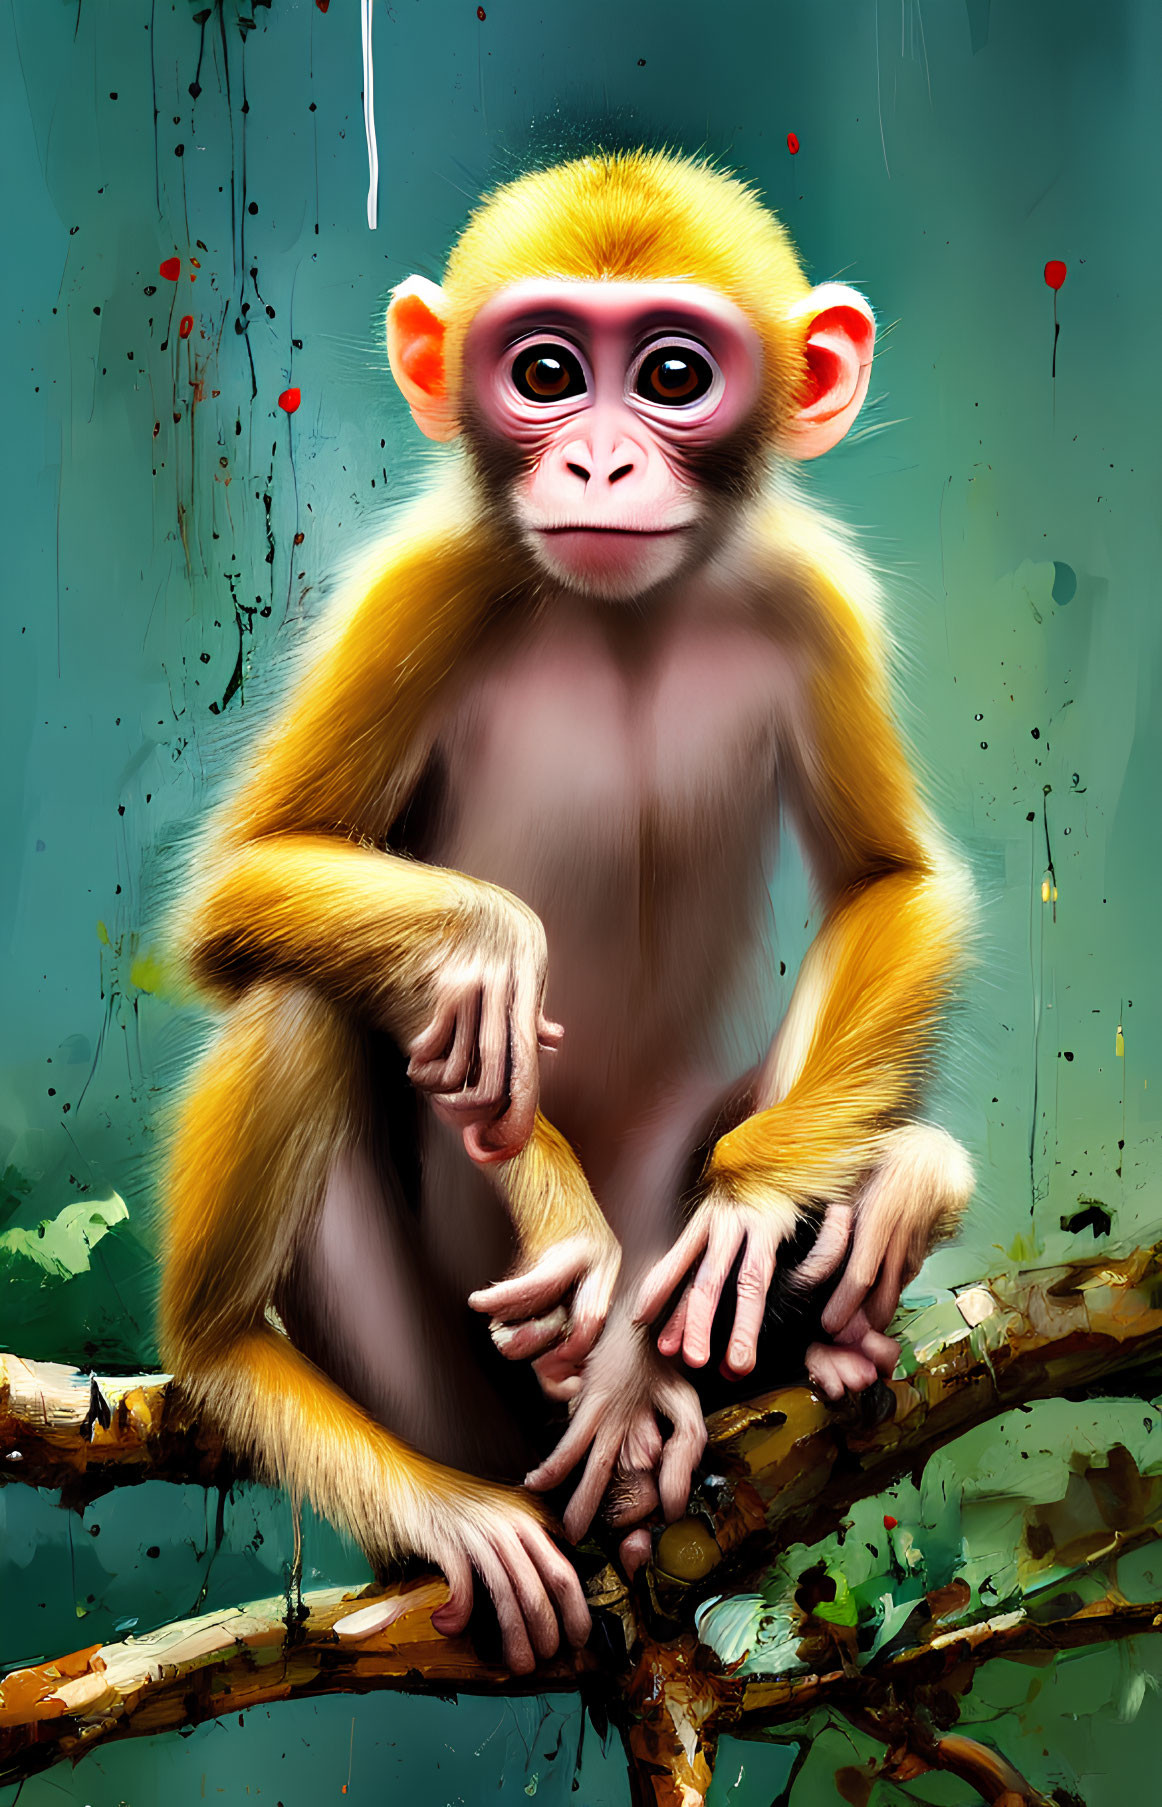 Vibrant baby monkey on tree branch against turquoise background